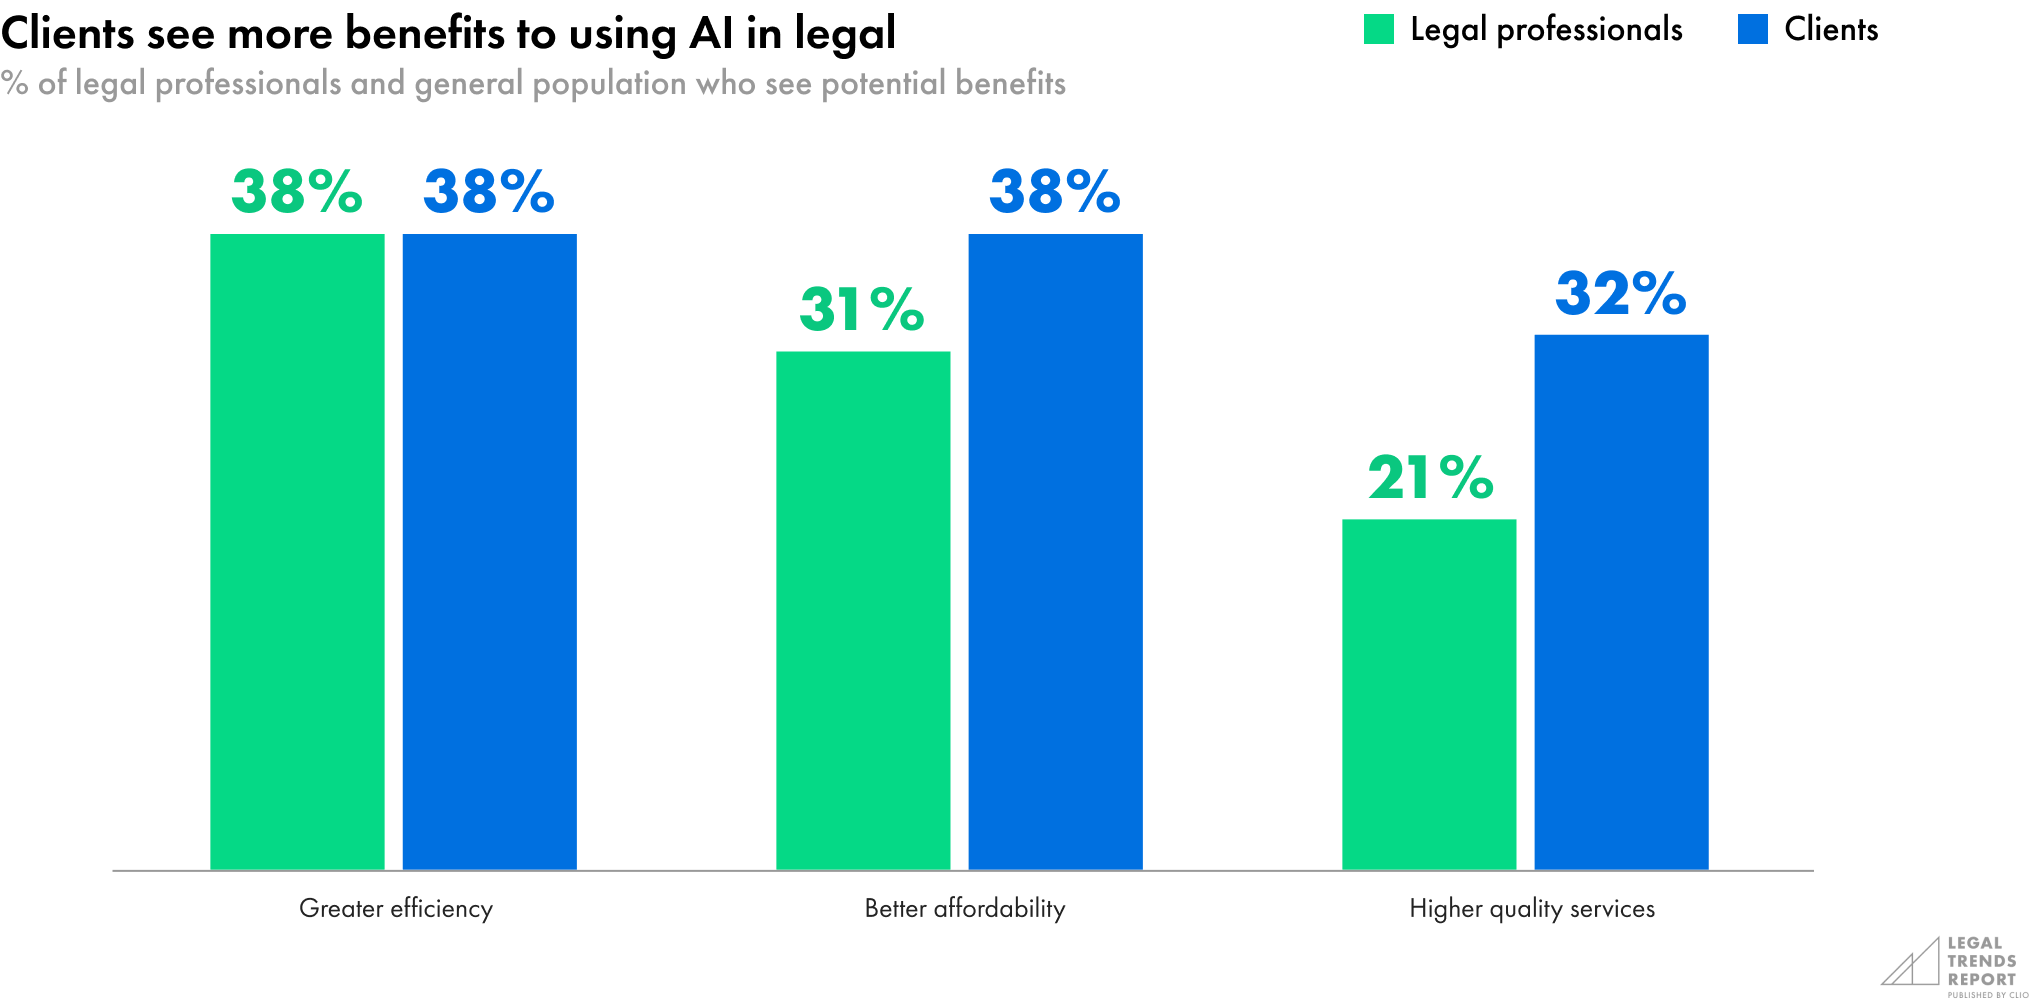 Clients see more benefits to using AI in legal